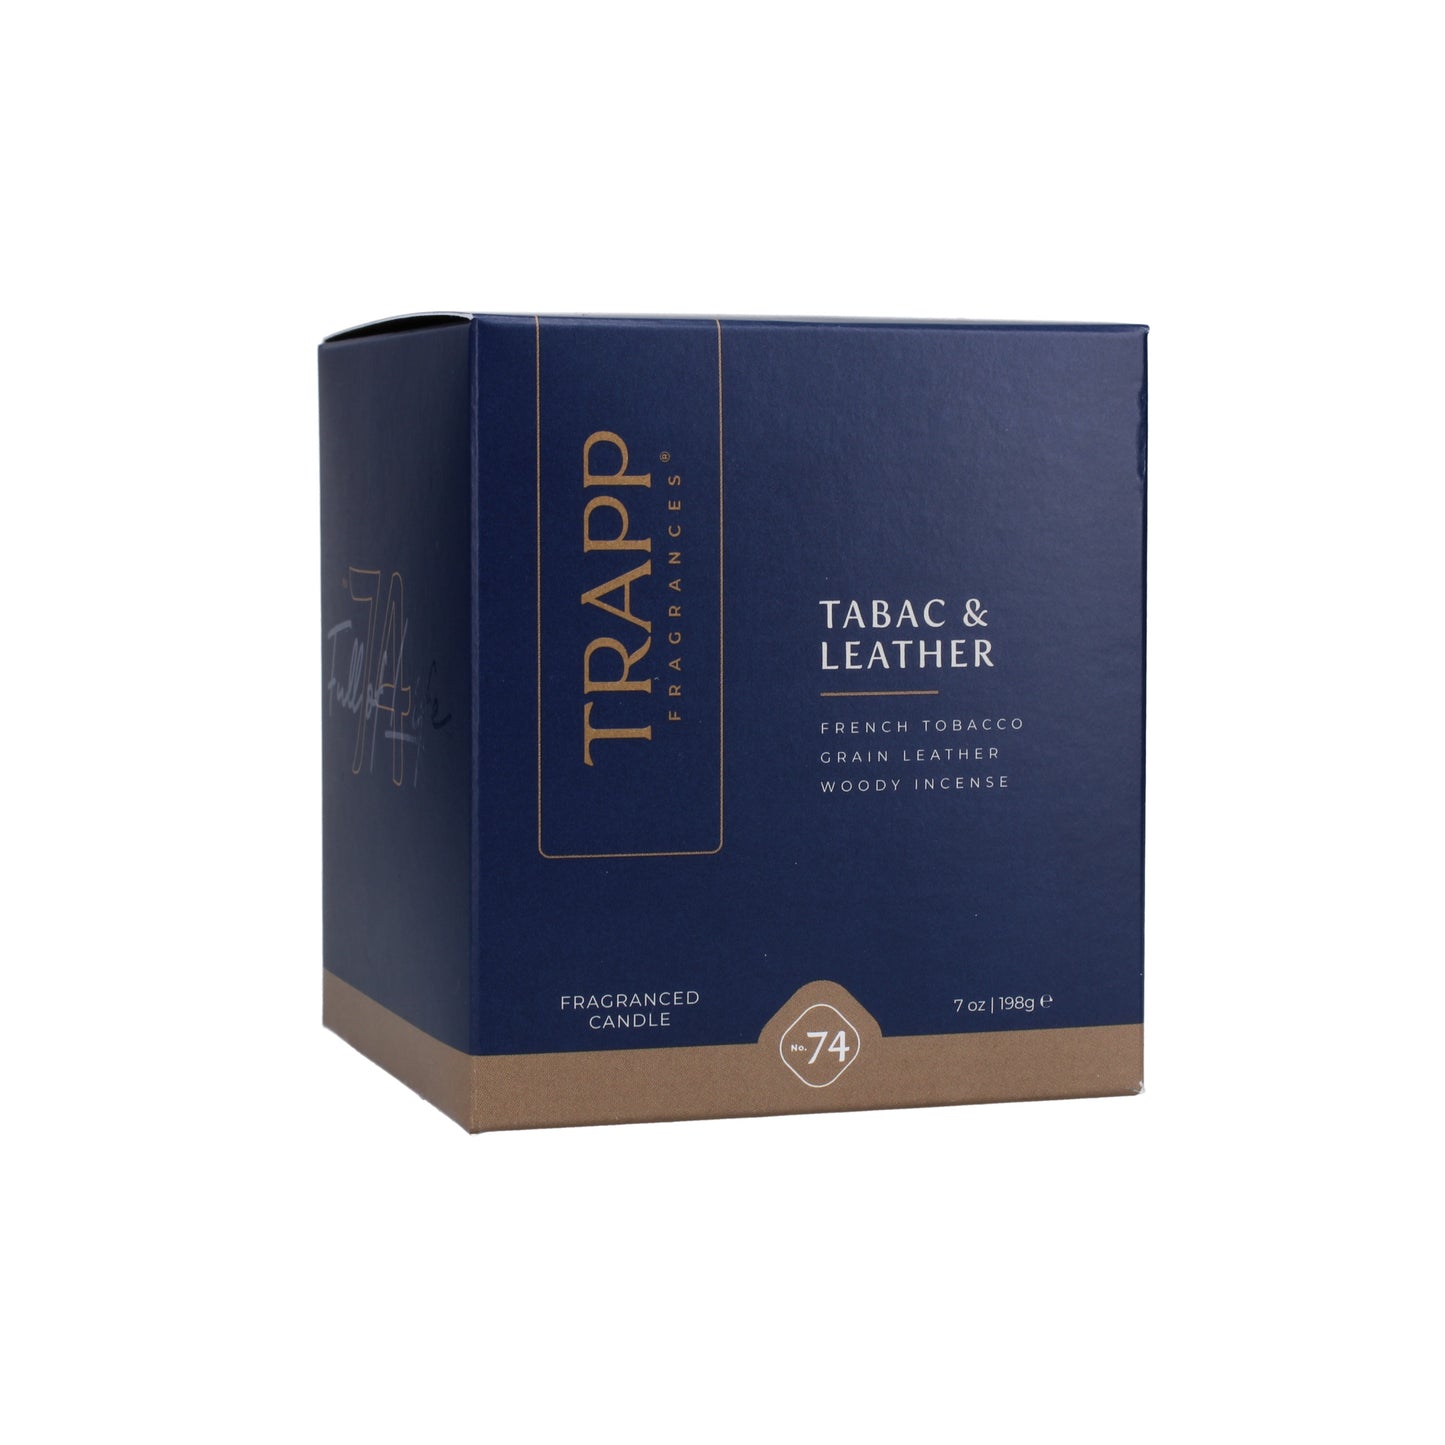 No. 74 Tabac & Leather 7 oz. Candle in Signature Box Image 6